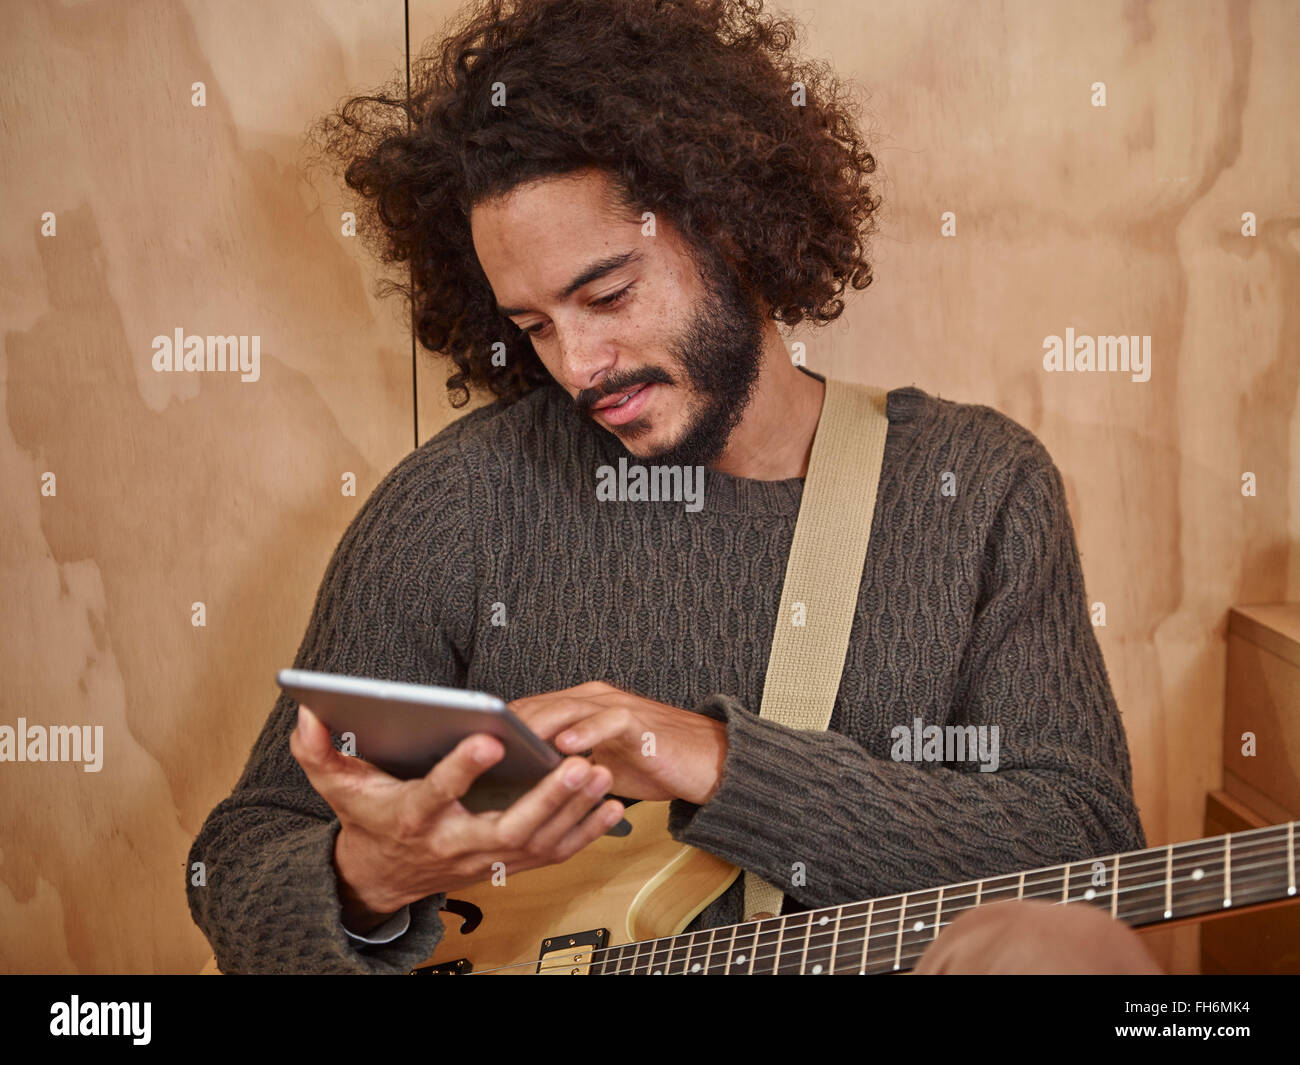 Young man with electric guitar looking at digital tablet Stock Photo